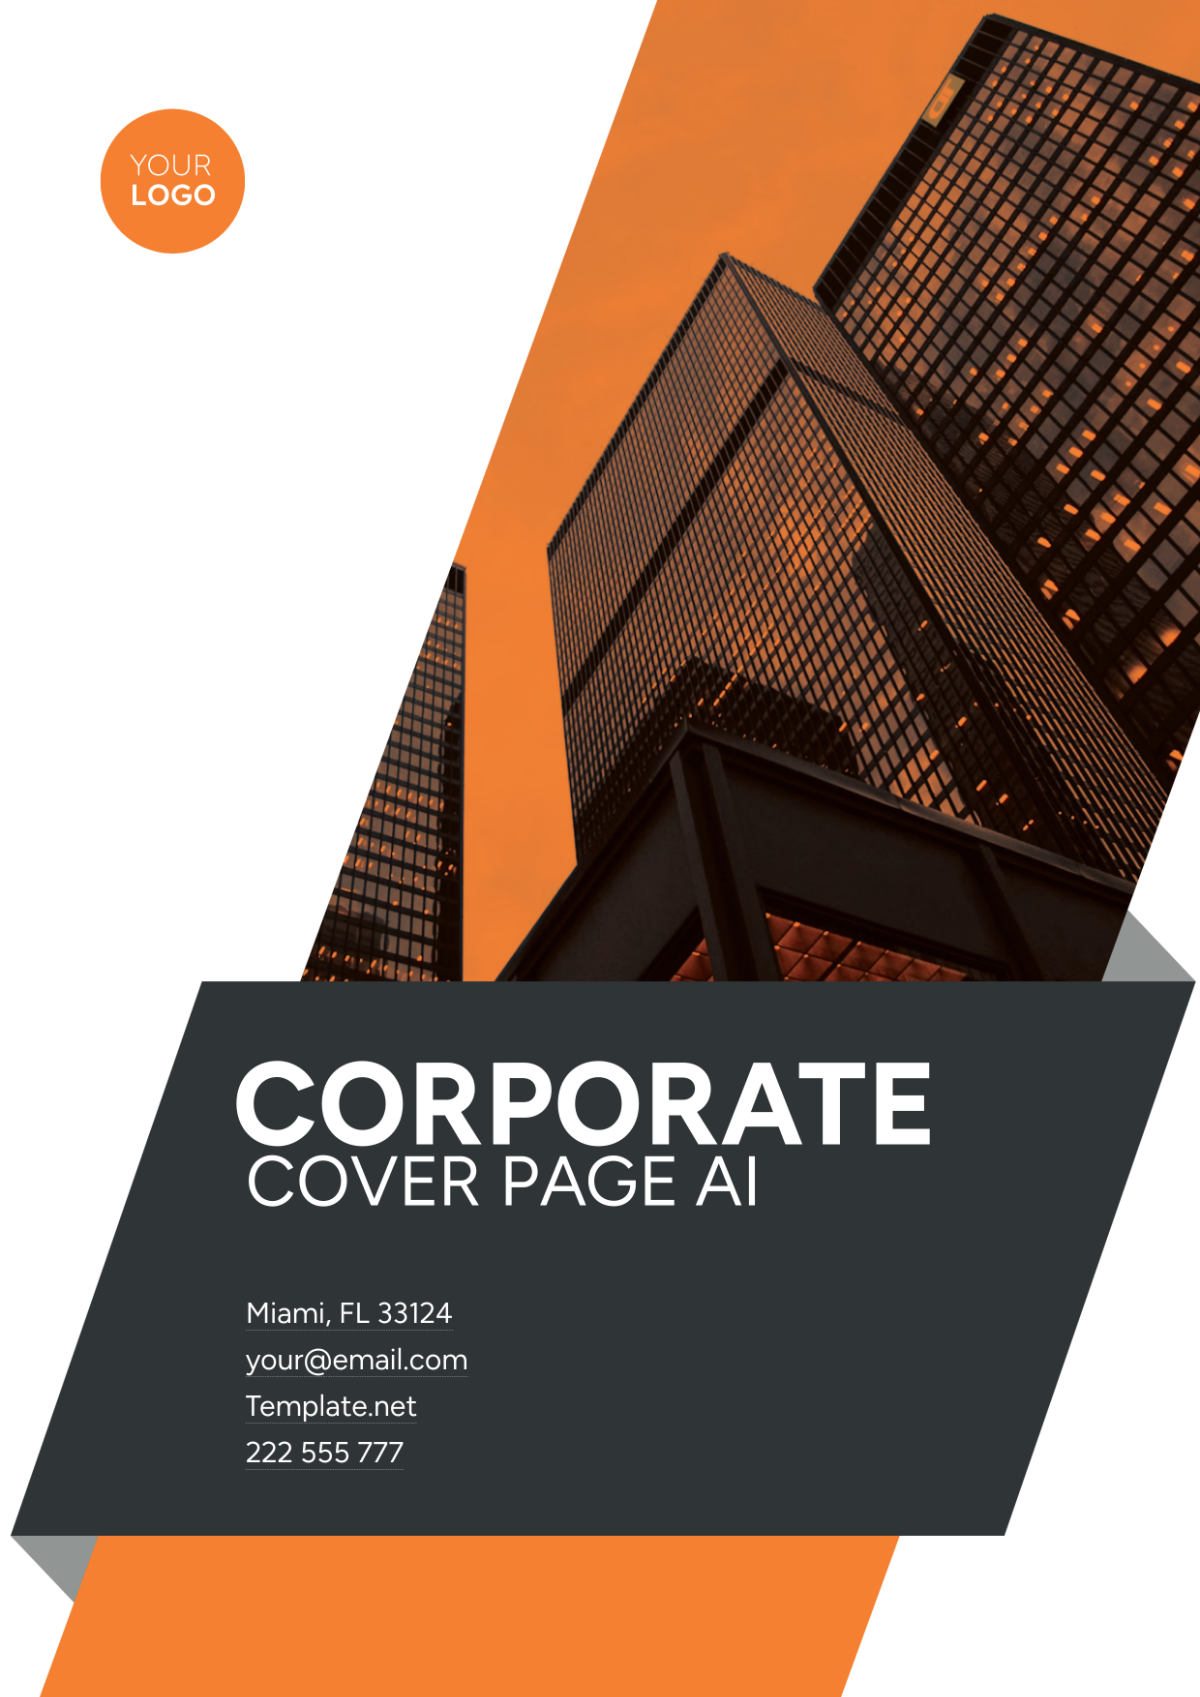 Corporate Cover Page AI Template